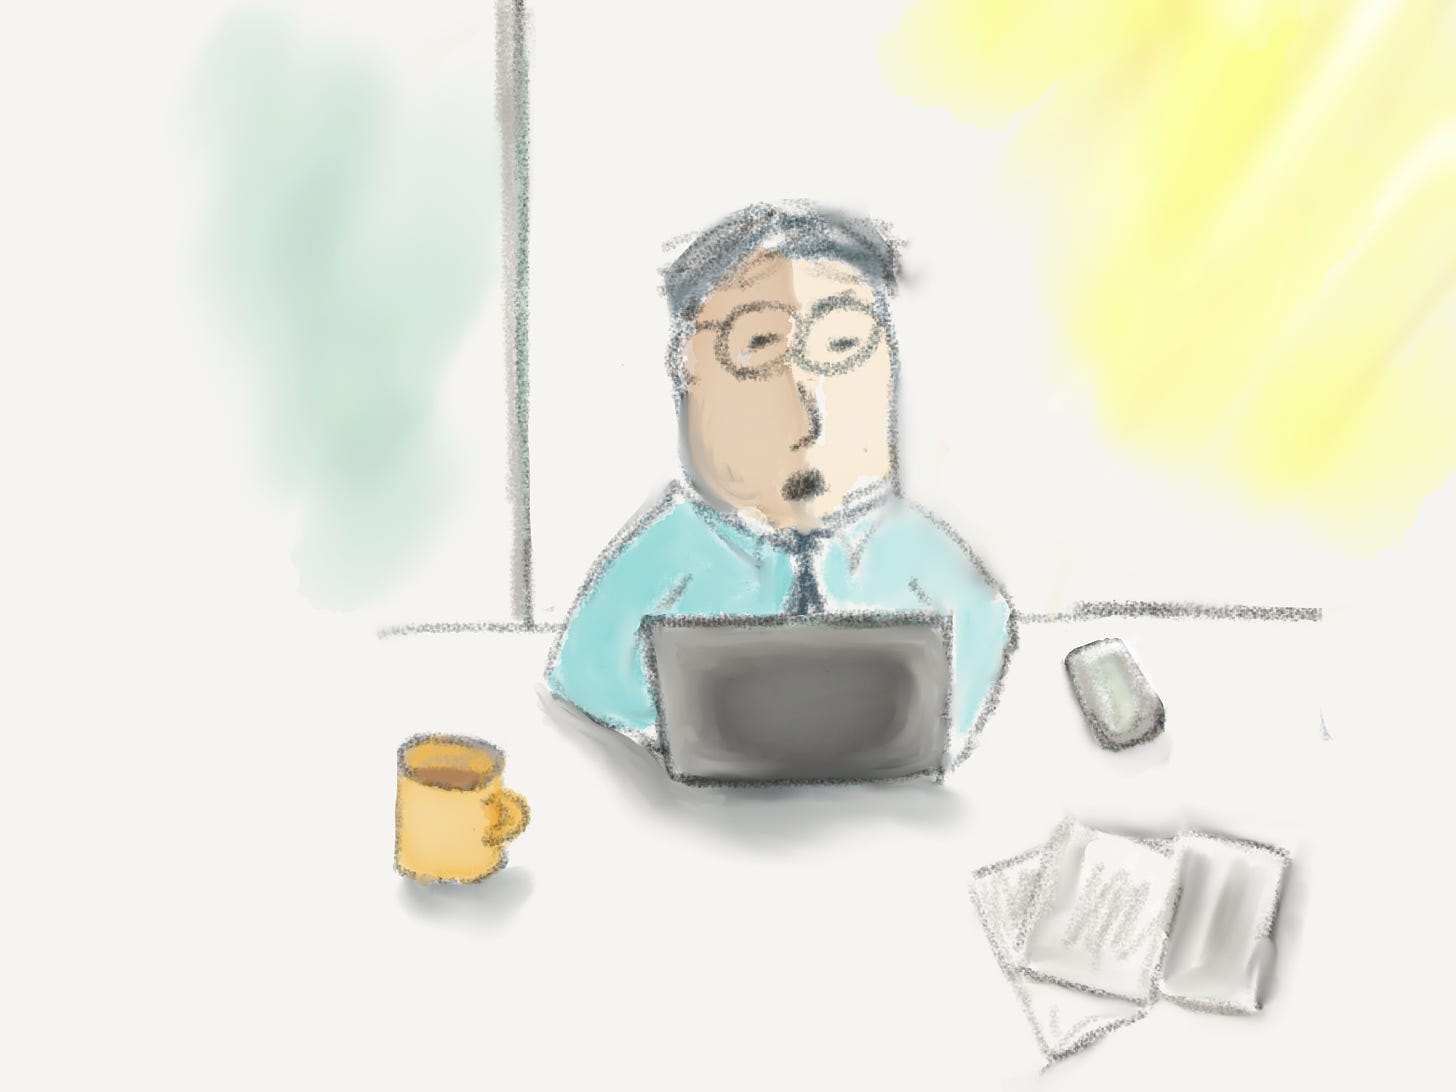 Illustration of a man typing on a laptop